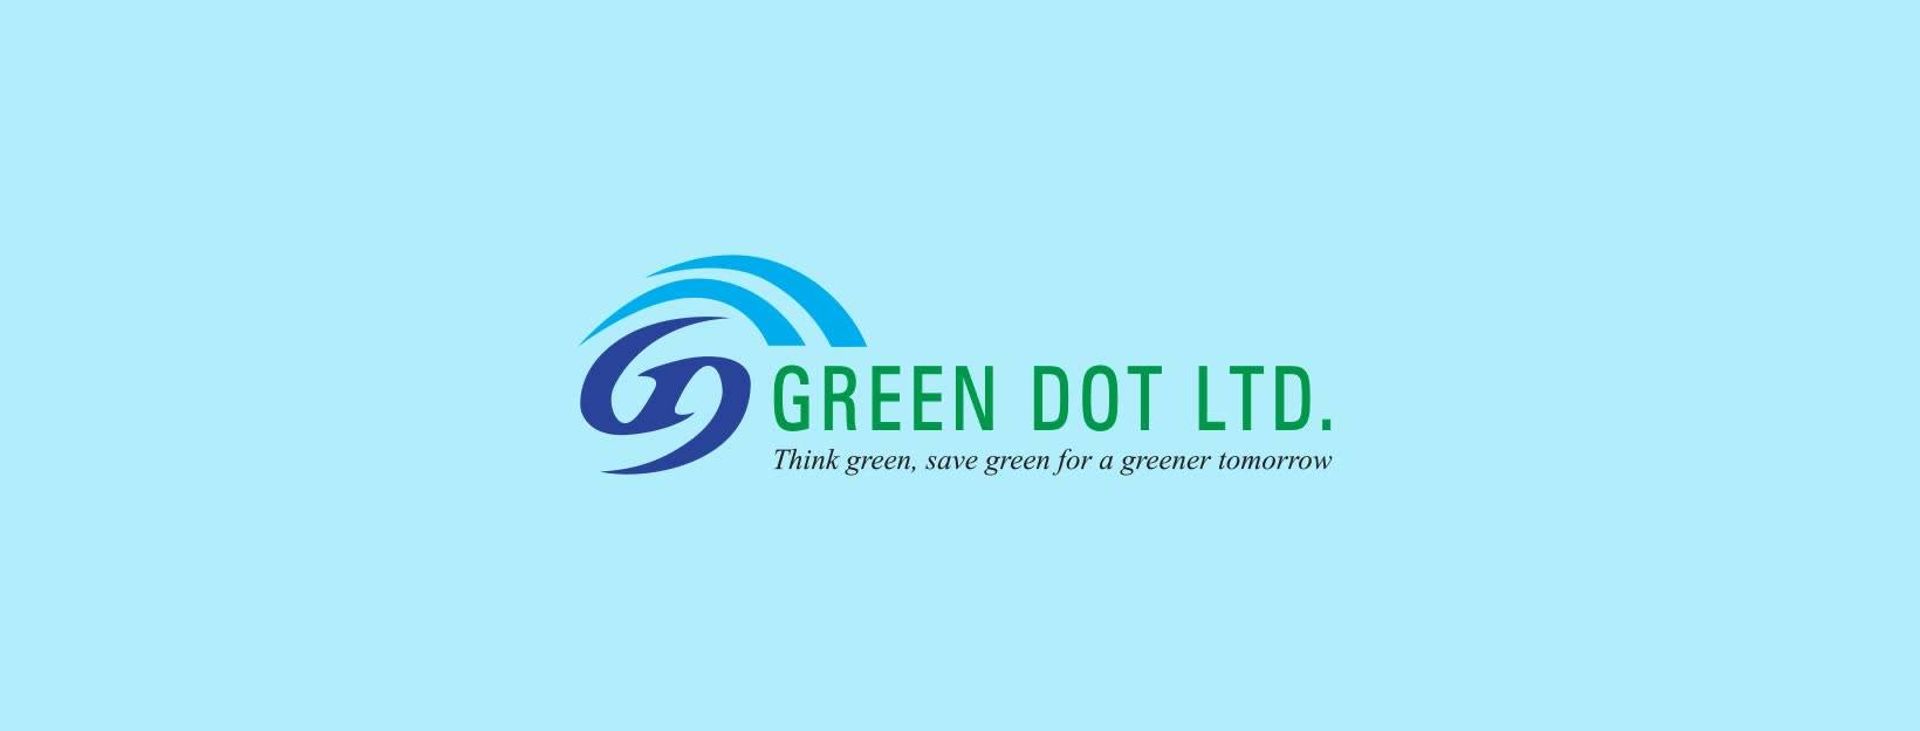 Green Dot Limited